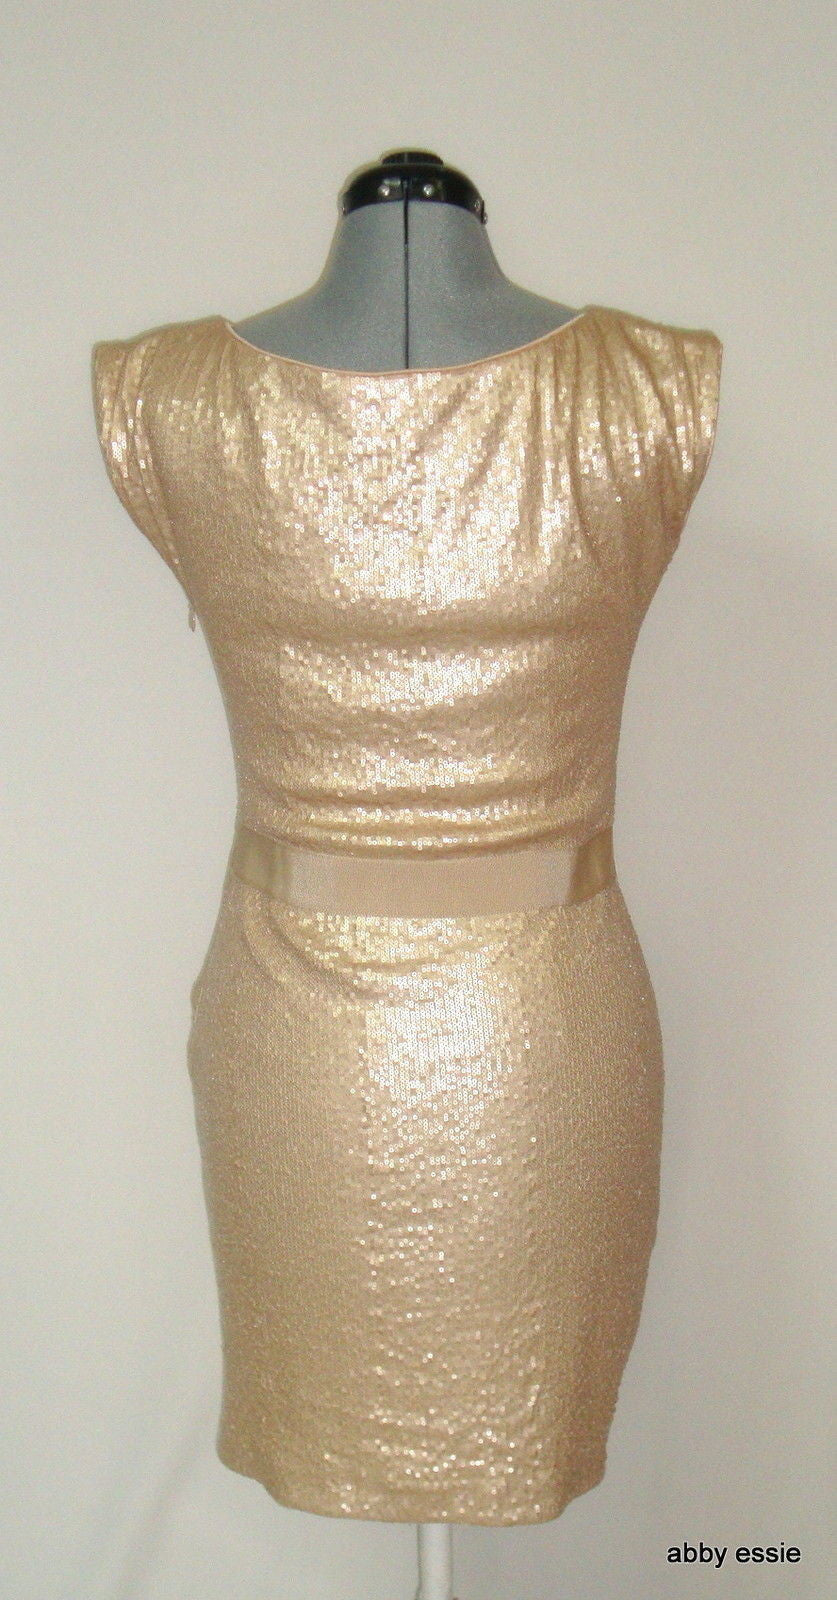 NWT LAUNDRY Shelli Segal Cream Nude Sequin Stretch Cocktail Formal Dress